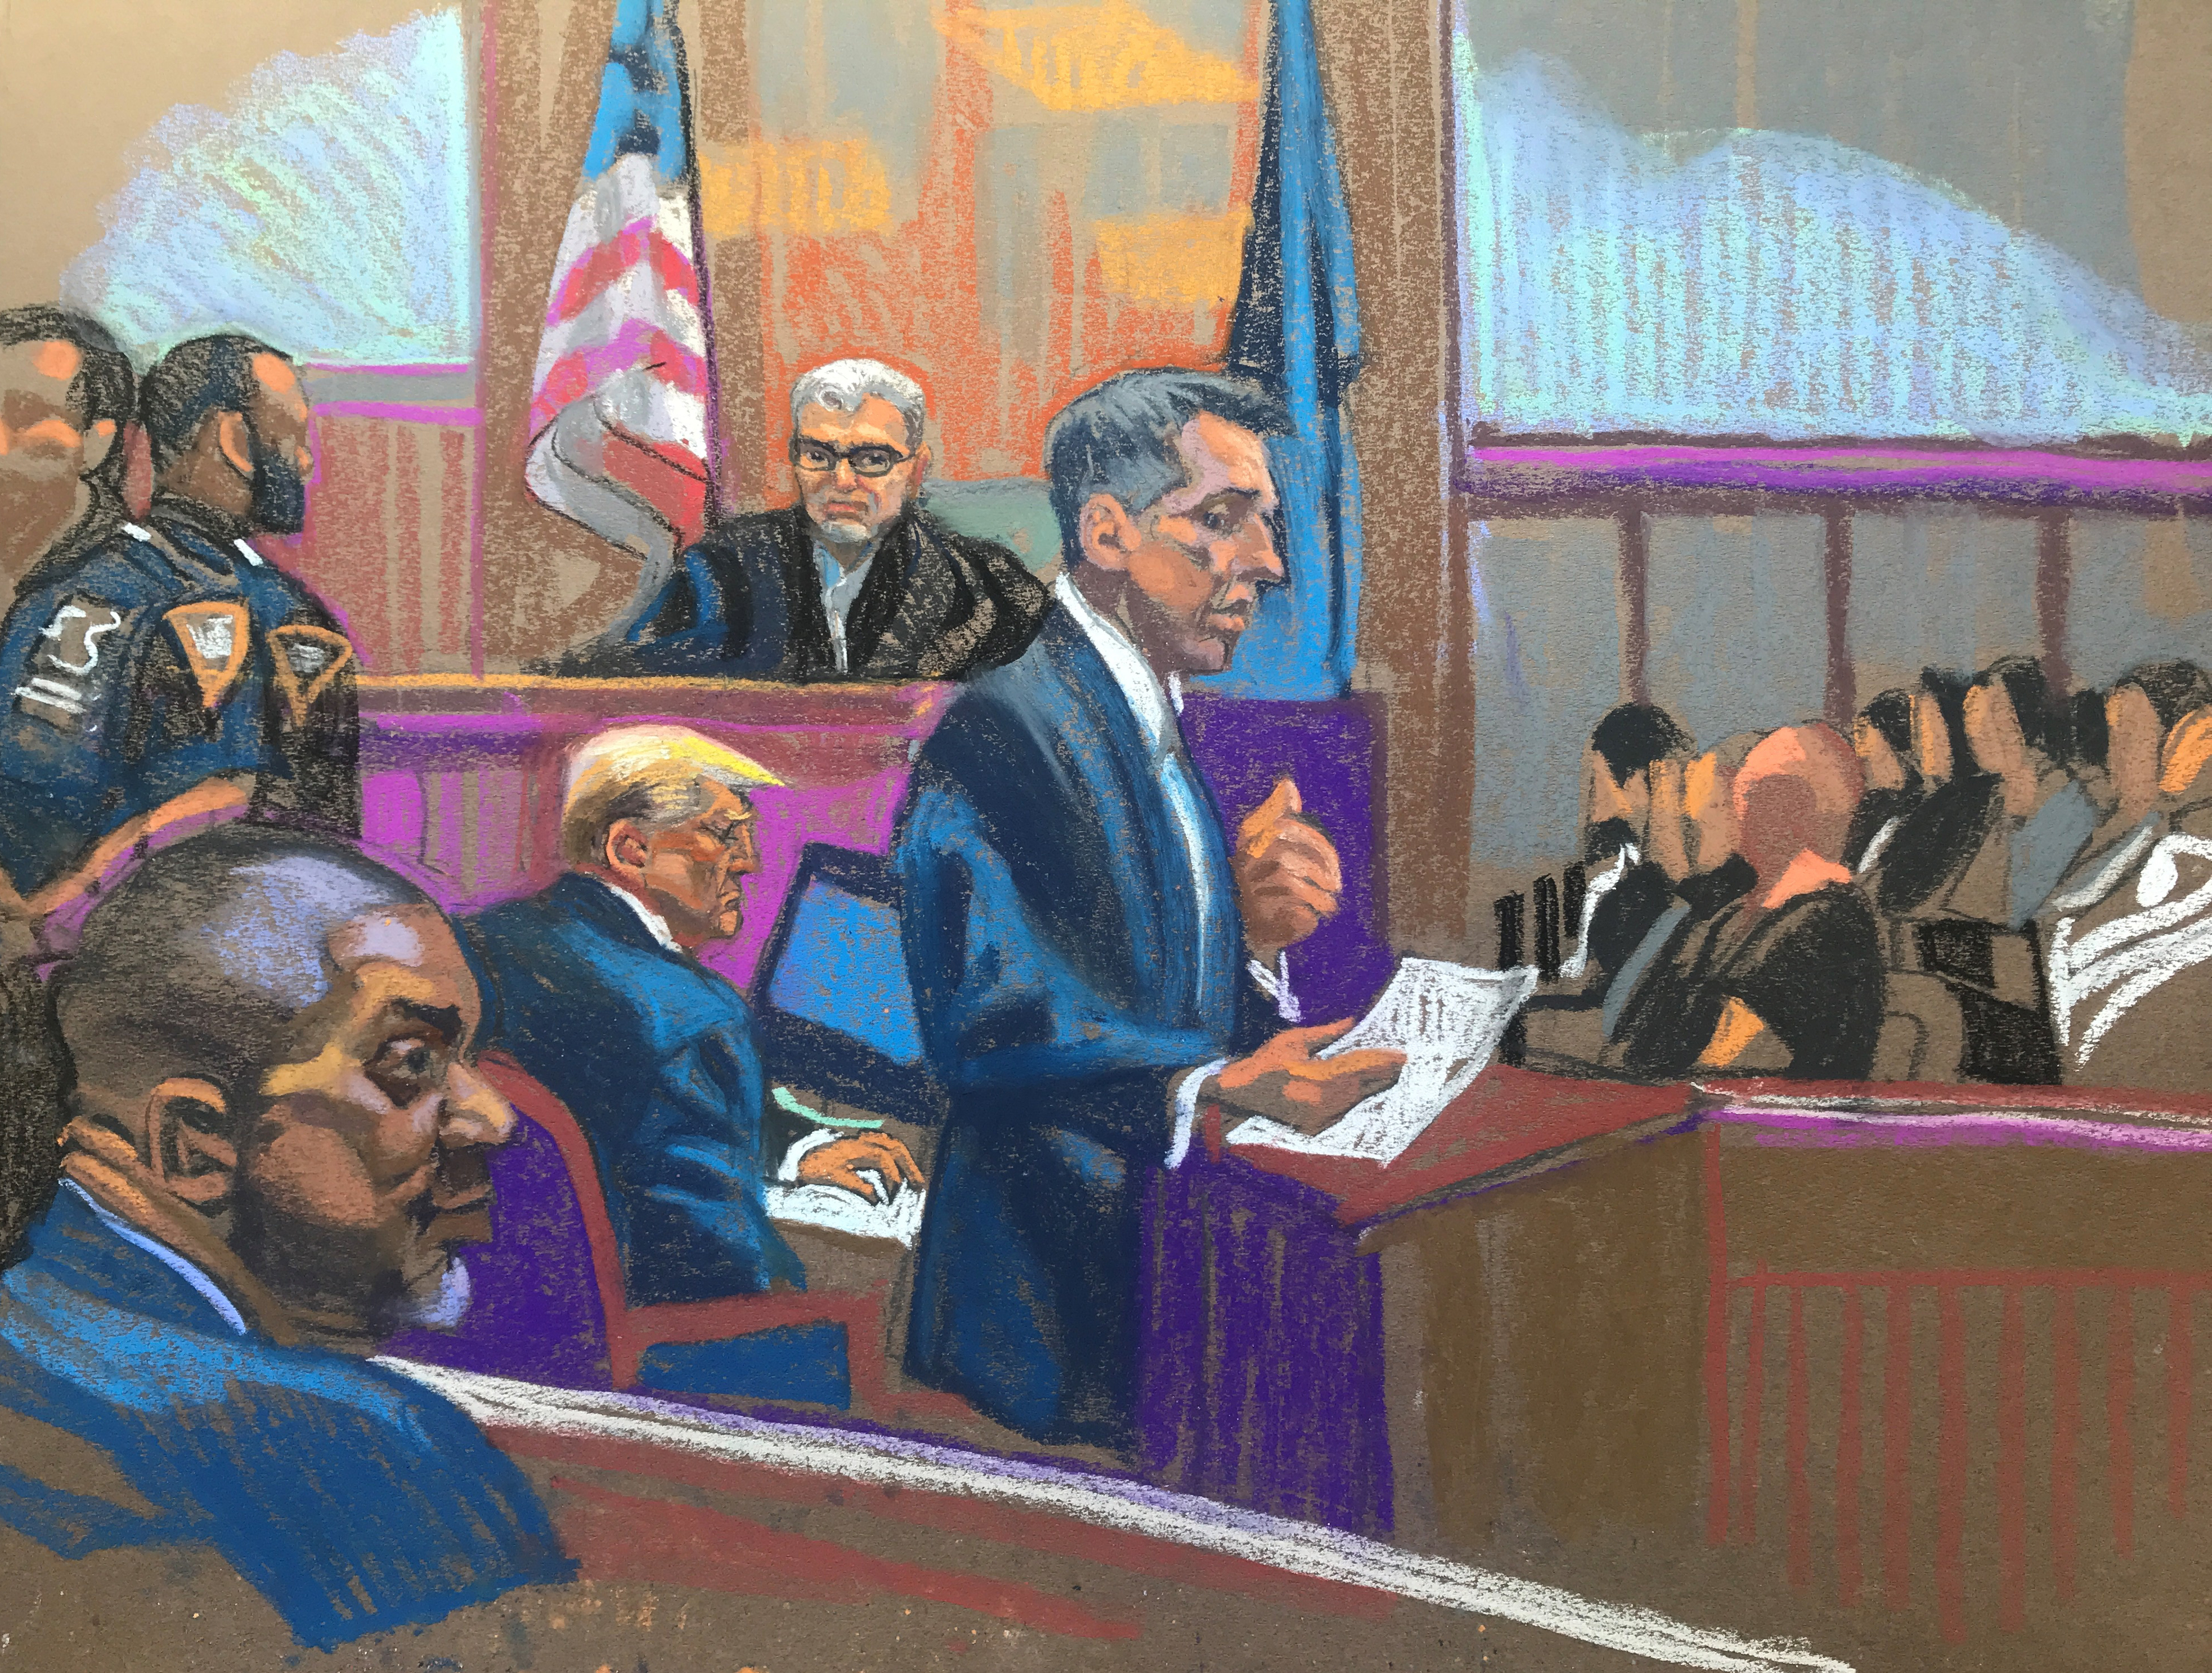 Prosecutor Matthew Colangelo speaks at the lectern Monday morning in opening statements in Day 5 of former President Donald Trump's criminal hush money trial taking place in Manhattan, New York, on April 22.